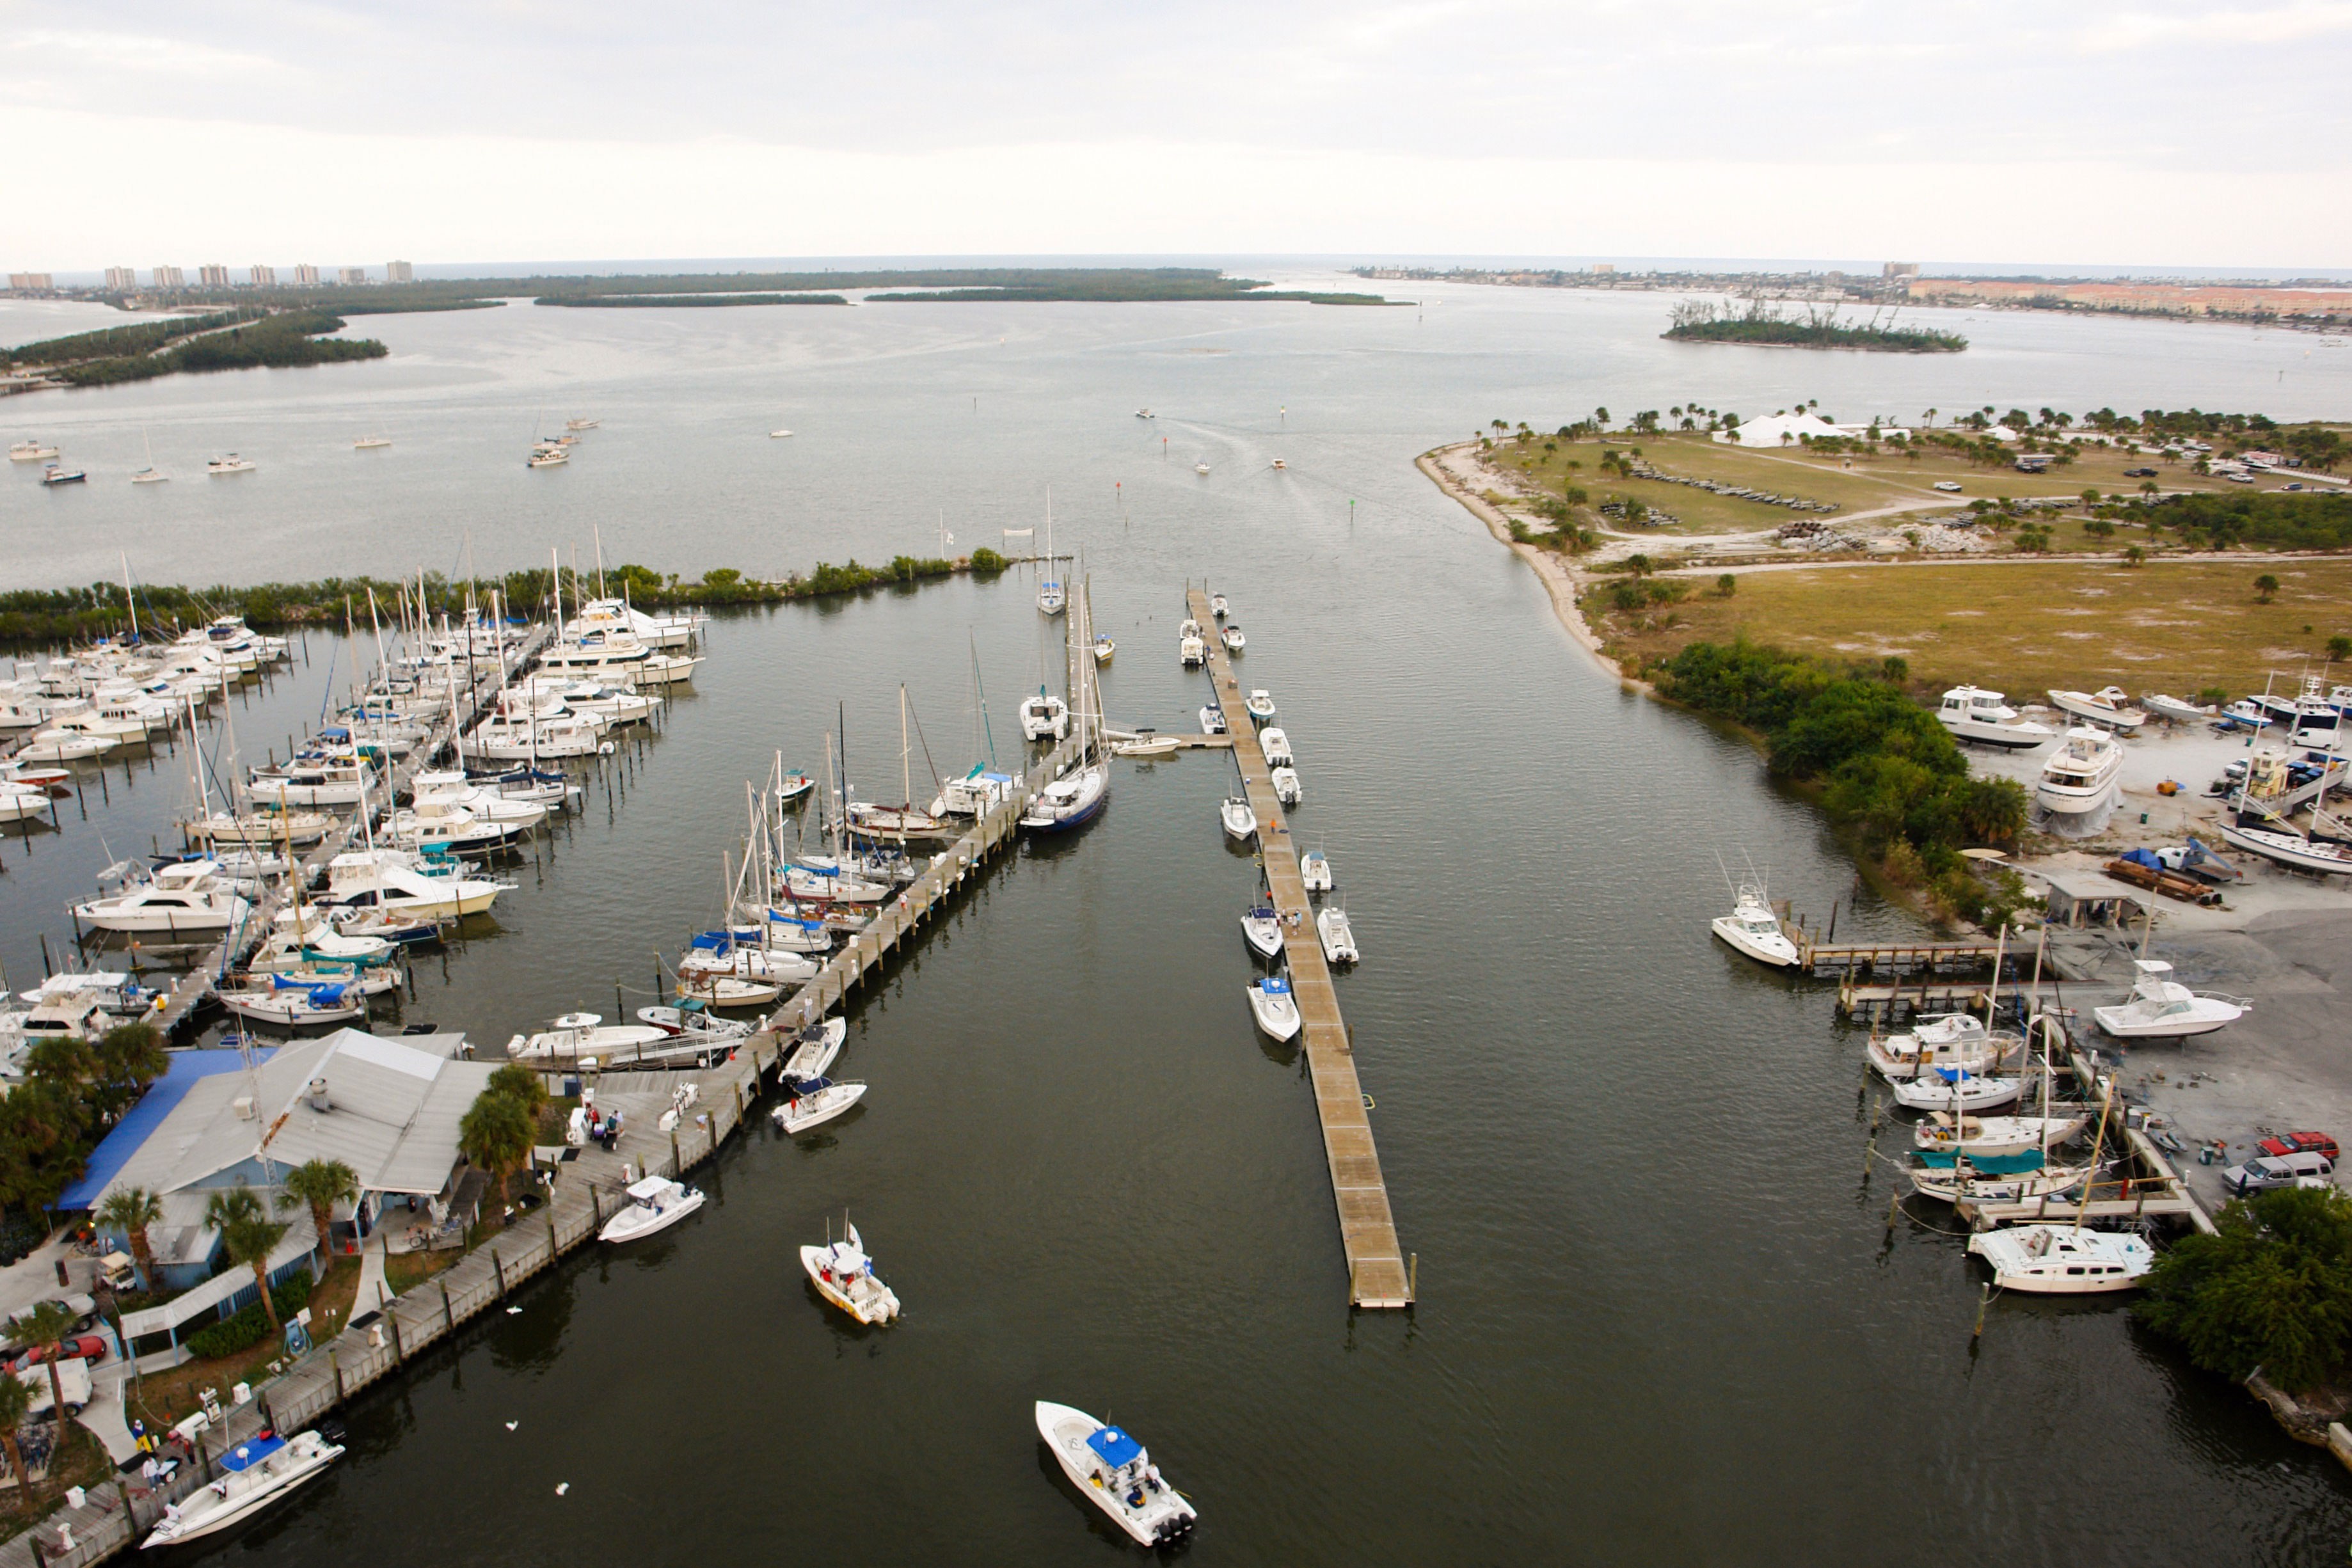 SKA Fishing Tournament Floating Docks - Aerial shot with ocean behind - Allsports Productions